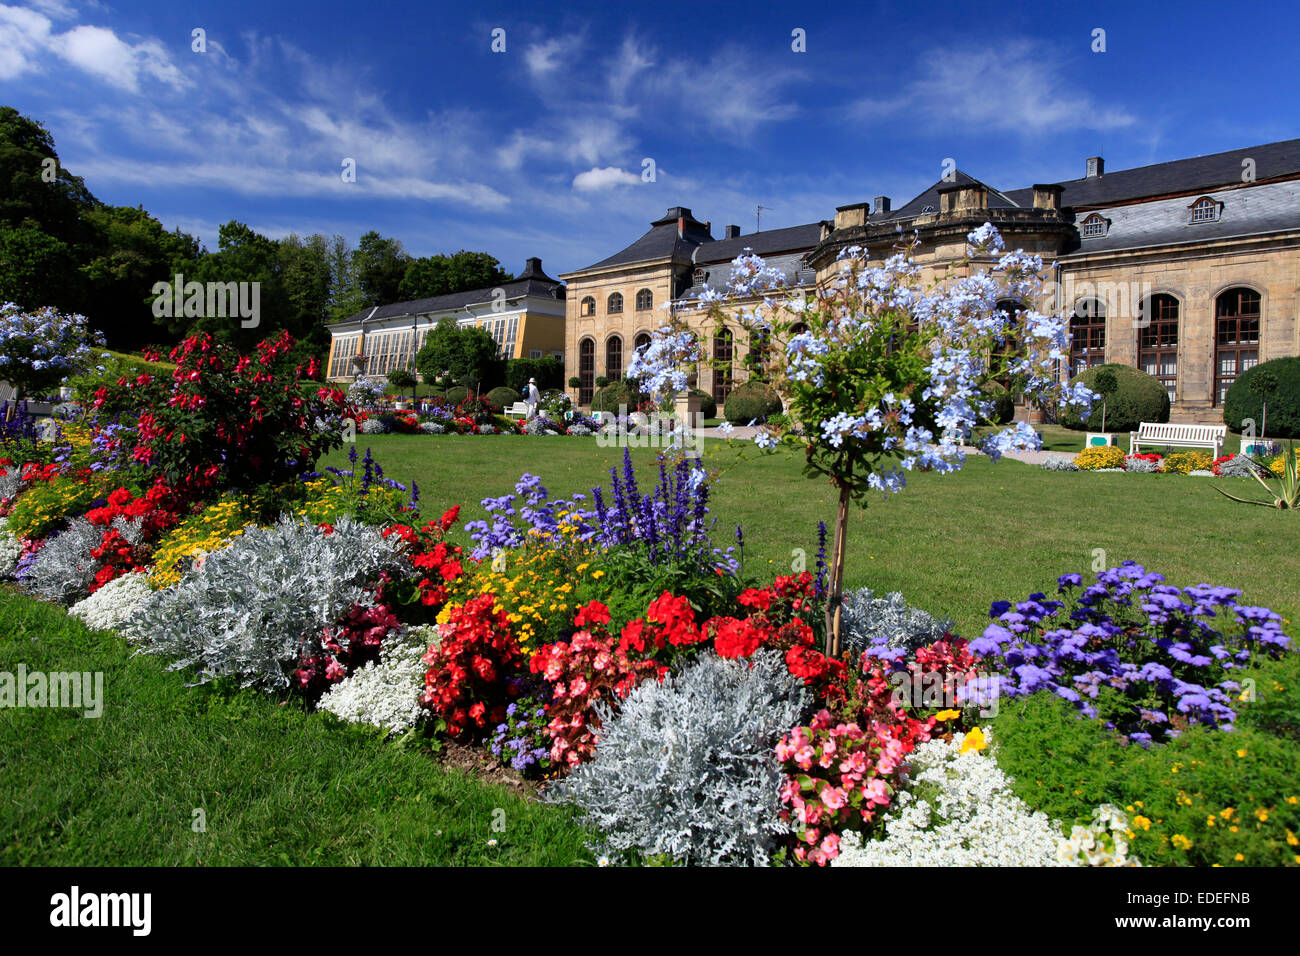 The orangery in Gotha is the park of the castle Friedenstein in Gotha, Germany. It is a gardens in the style of the late baroque. Photo: Klaus Nowottnick Date: September 03, 2012 Stock Photo